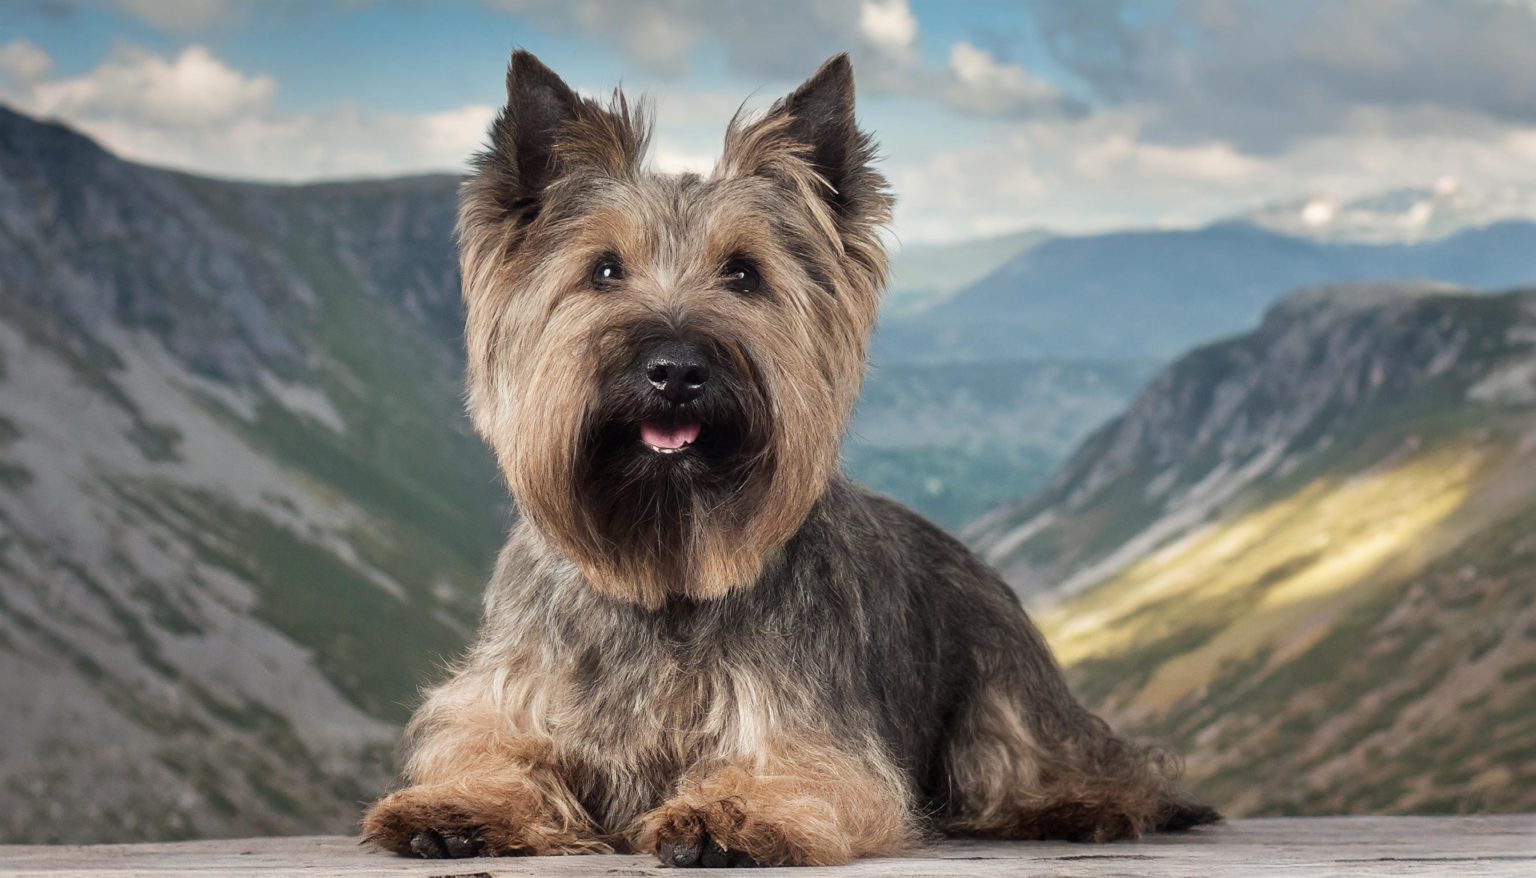 The Cairn Terrier originated in the Western Isles of Scotland, where, for centuries, he has been used as a working terrier, and was formerly known as the "Short-haired Skye Terrier." The Cairn Terrier is alert, intelligent, active and long-lived.